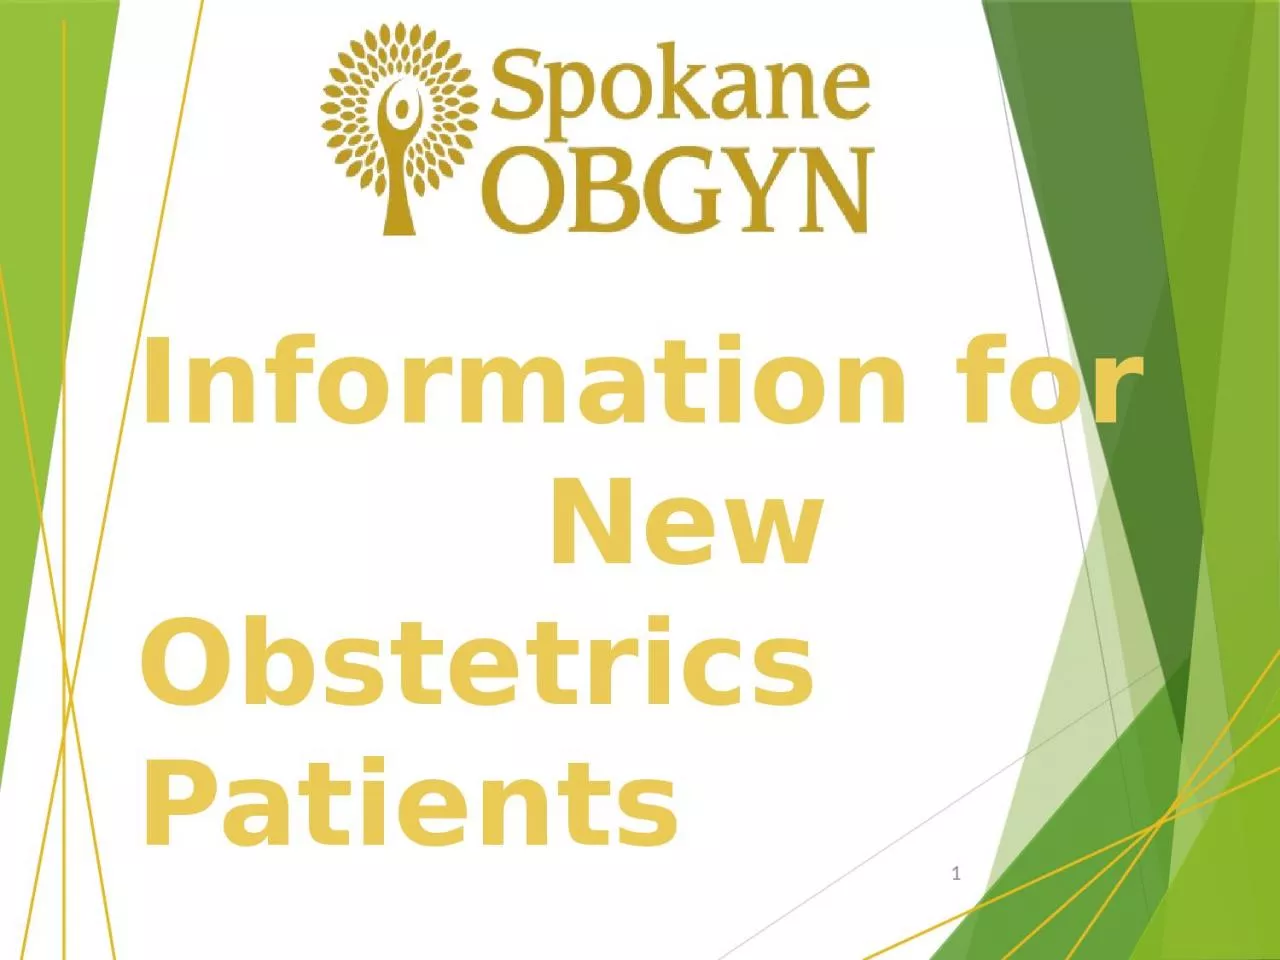 Information for            New Obstetrics Patients